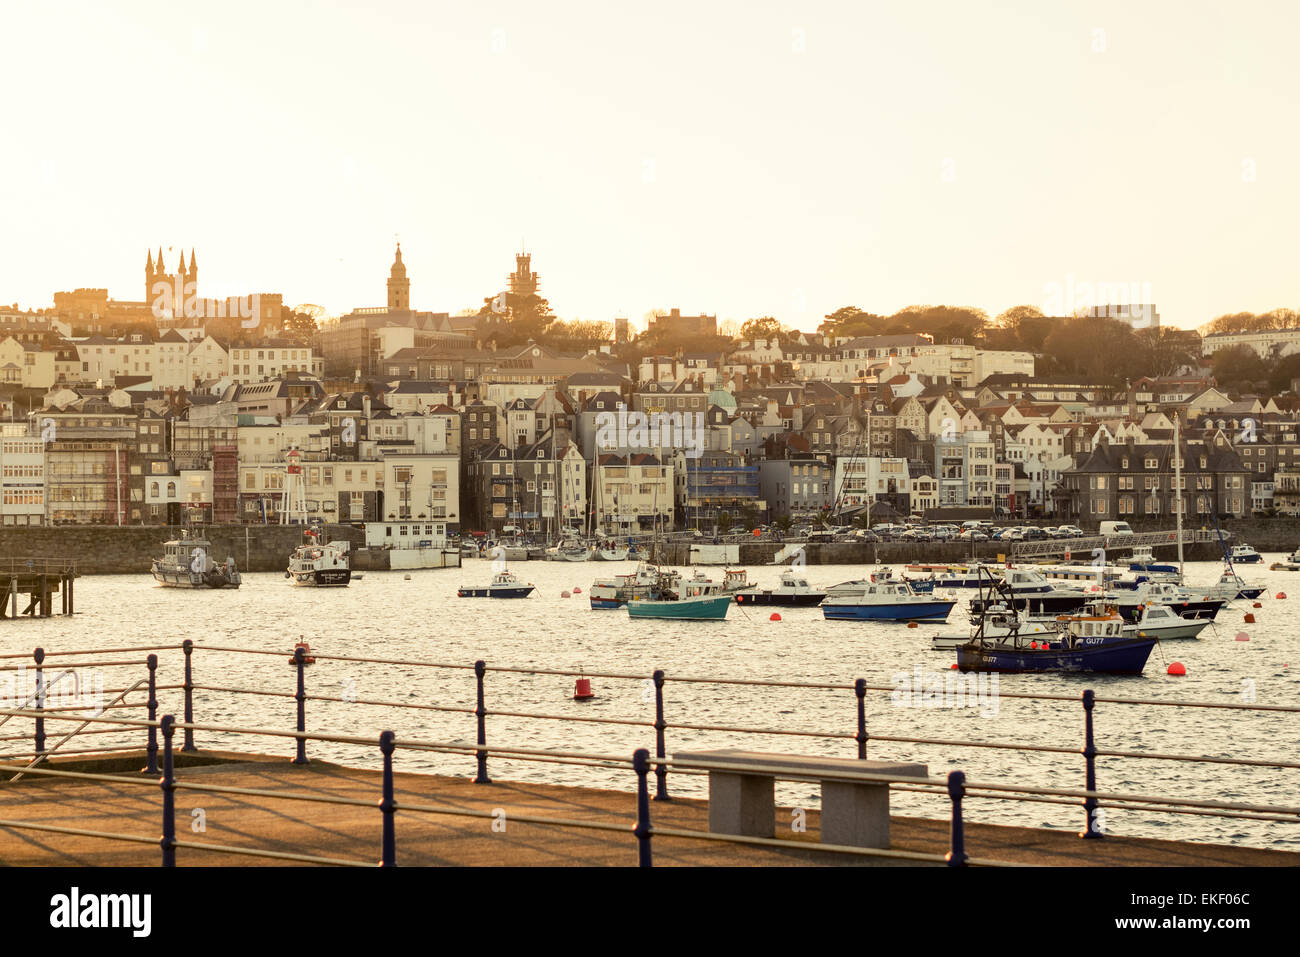 St Peter Port, capital of the Island Guernsey. Warm sunset, looking west over the harbor with fishing boats and town houses. Stock Photo